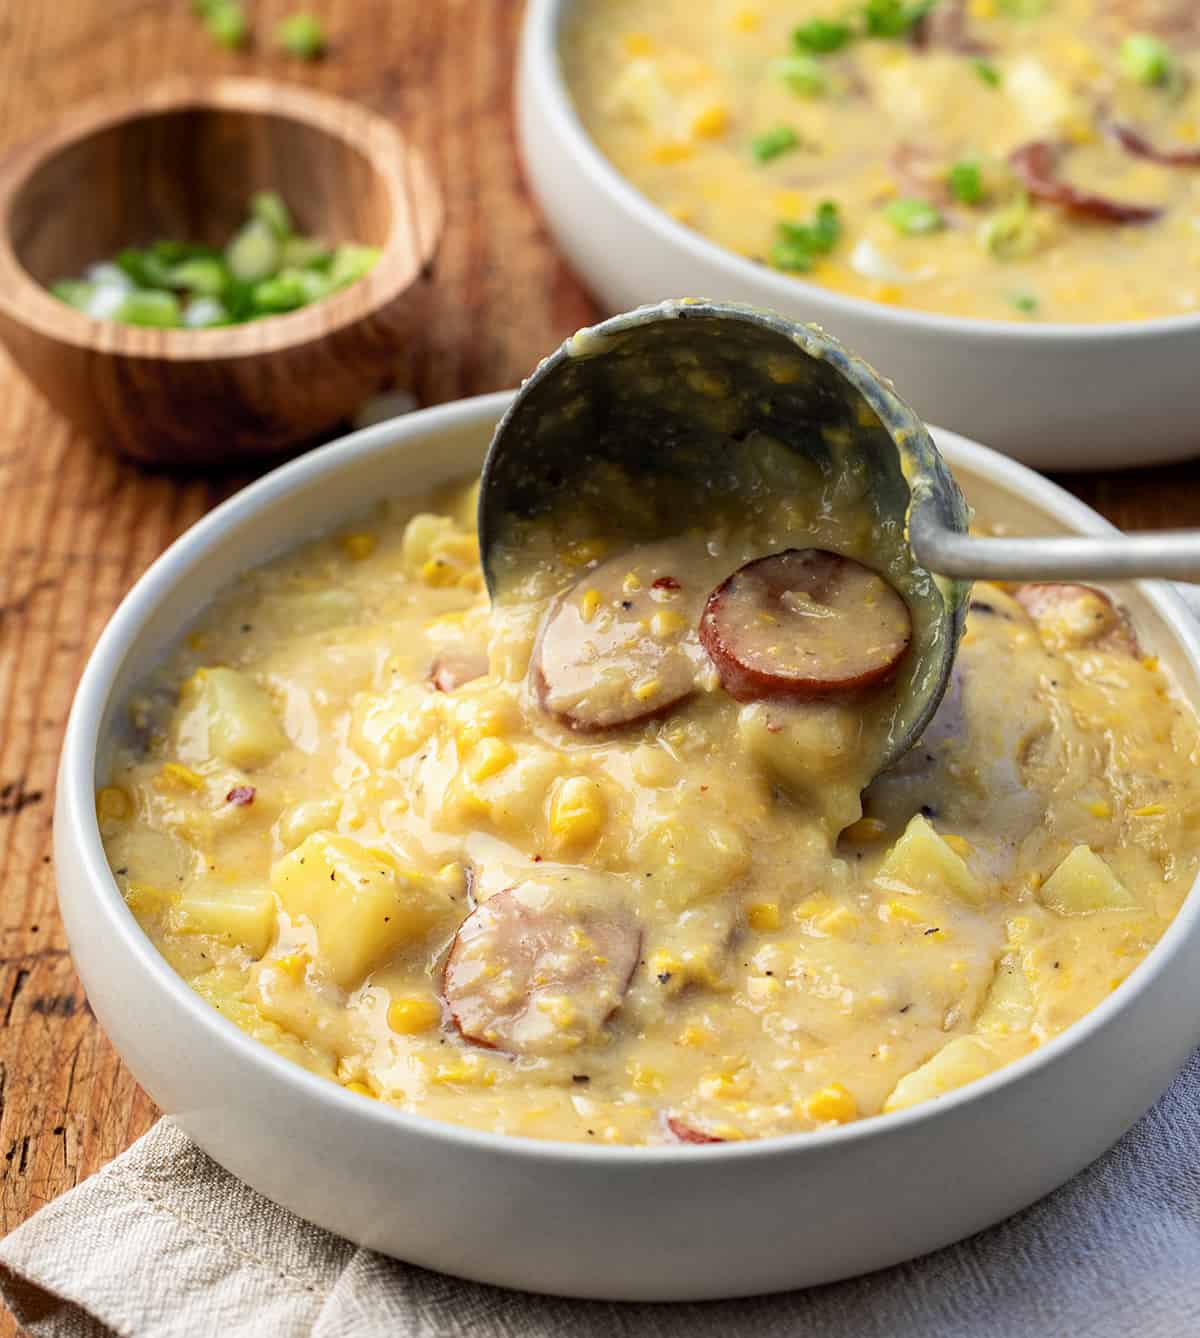 Ladleing Andouille Corn Chowder into a bowl.